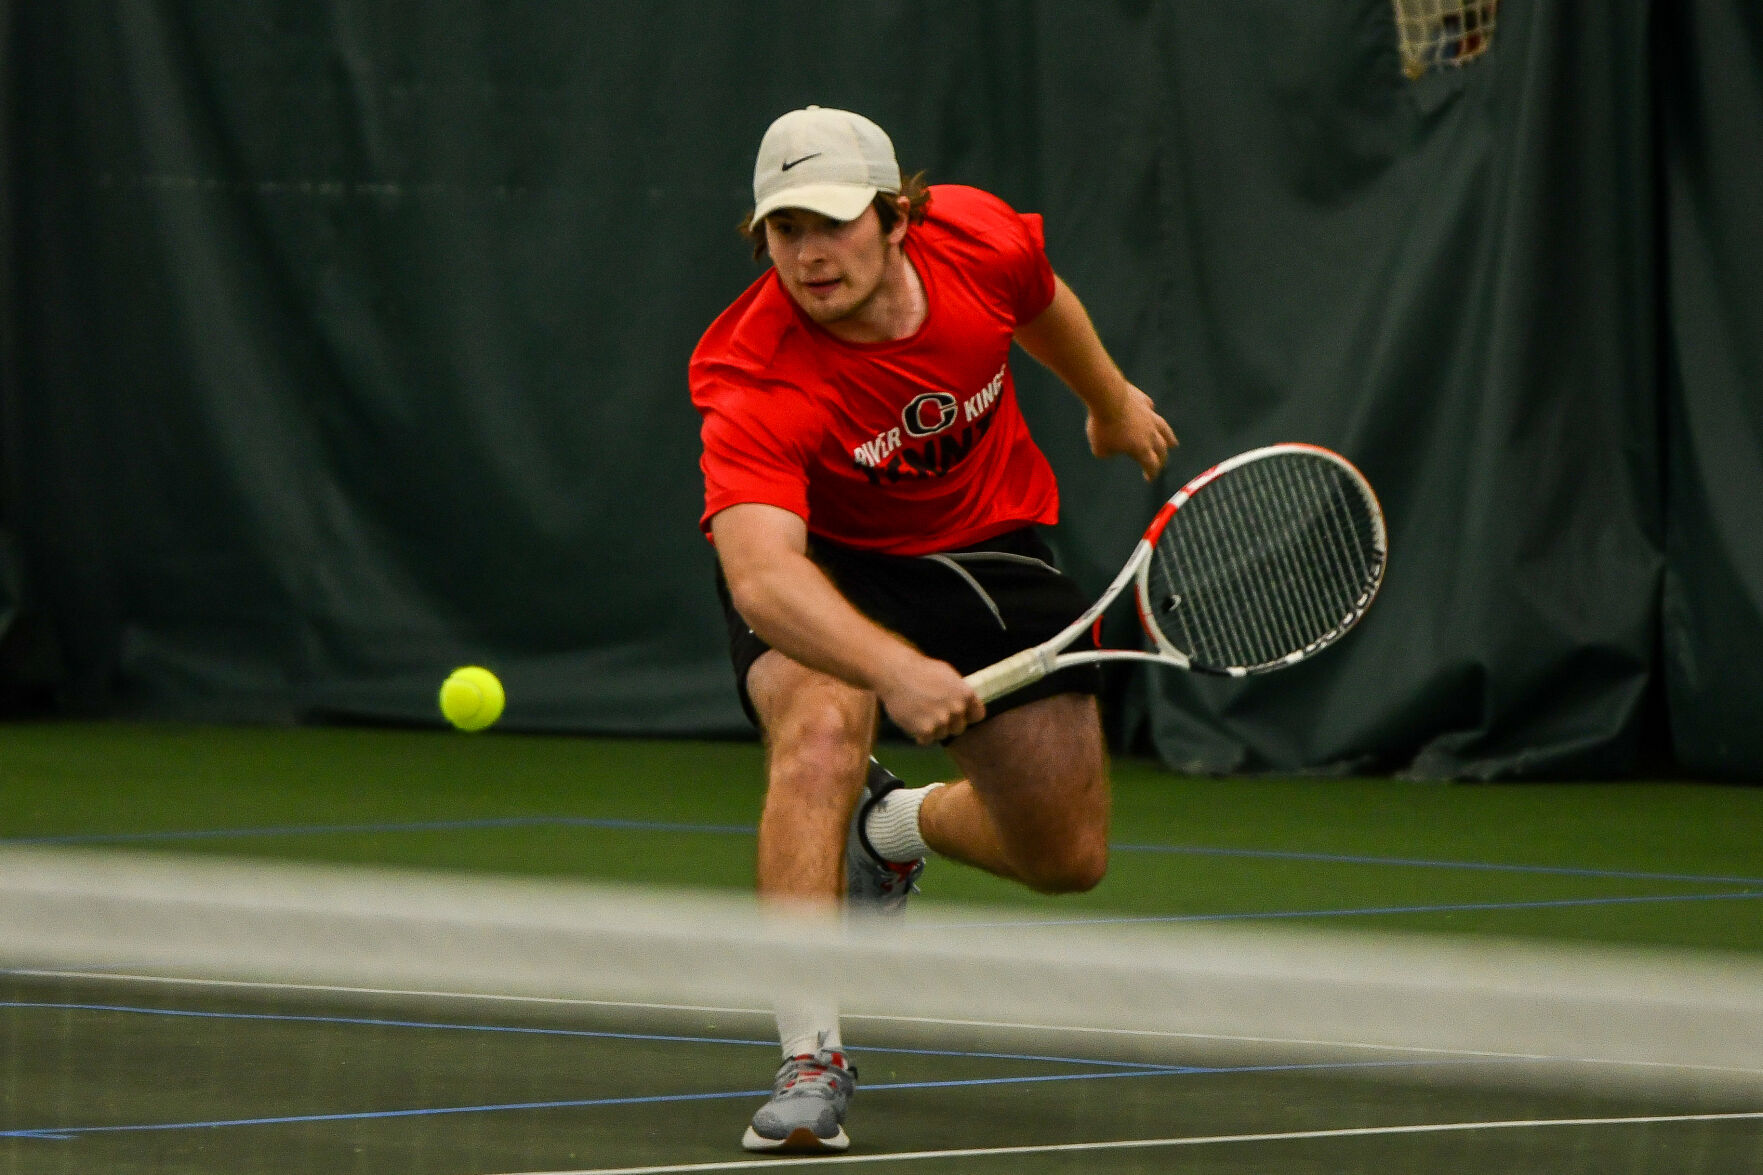 River Kings topped 5-4 by Knights in MAC tennis play